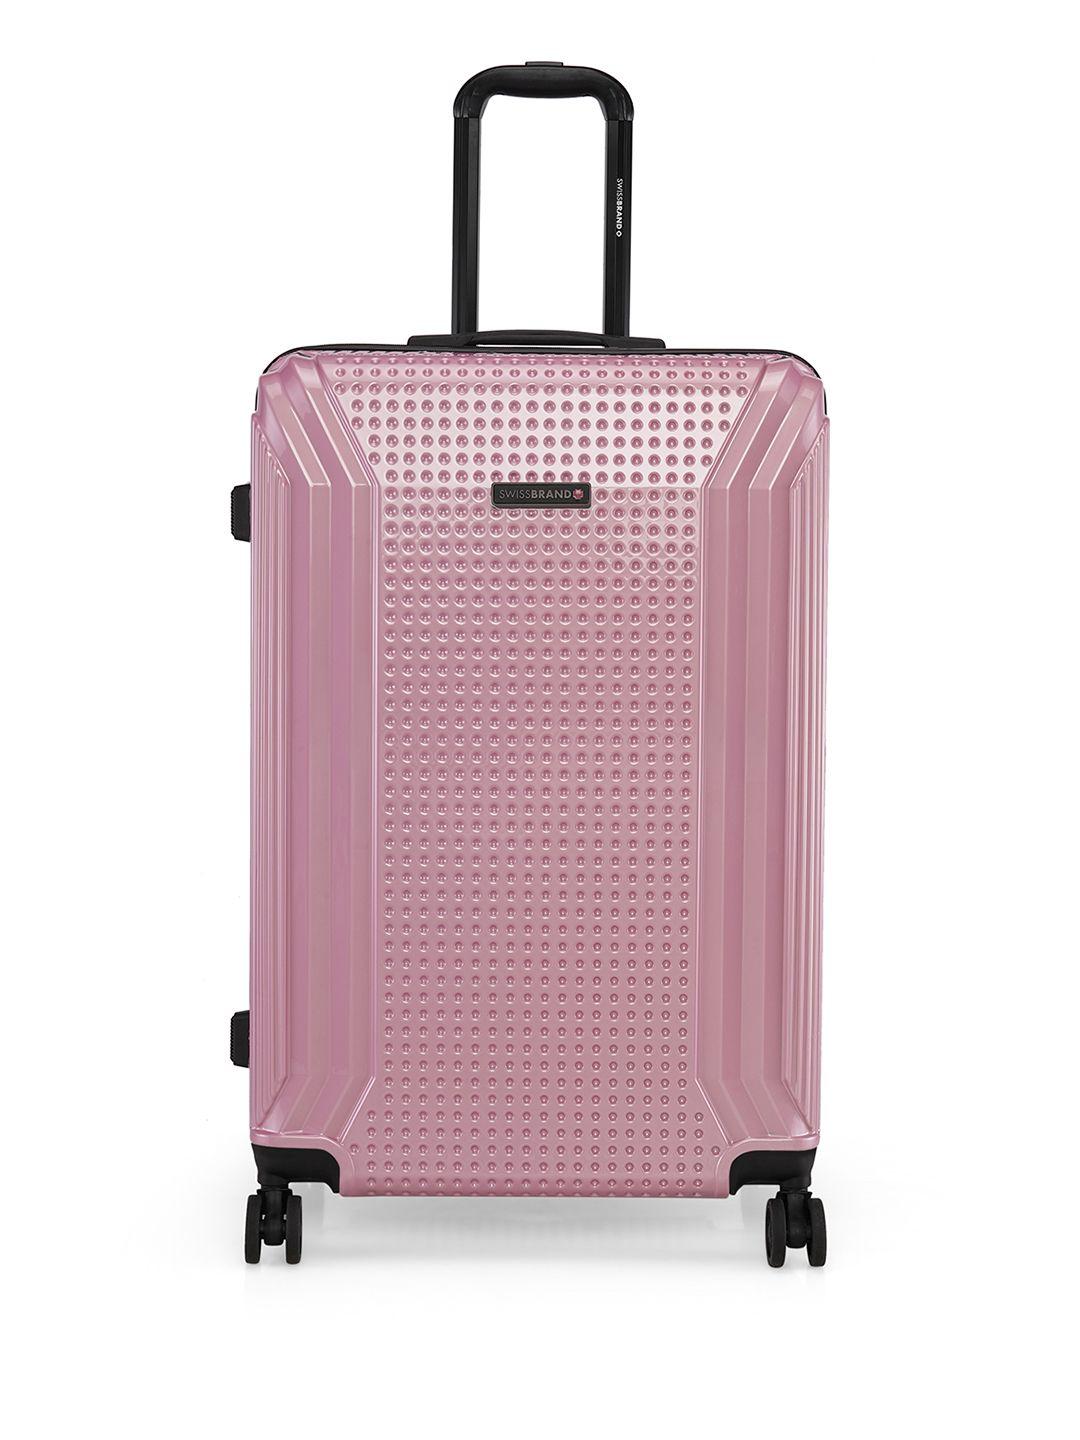 swiss brand rose gold-toned textured vernier hard-sided large trolley suitcase